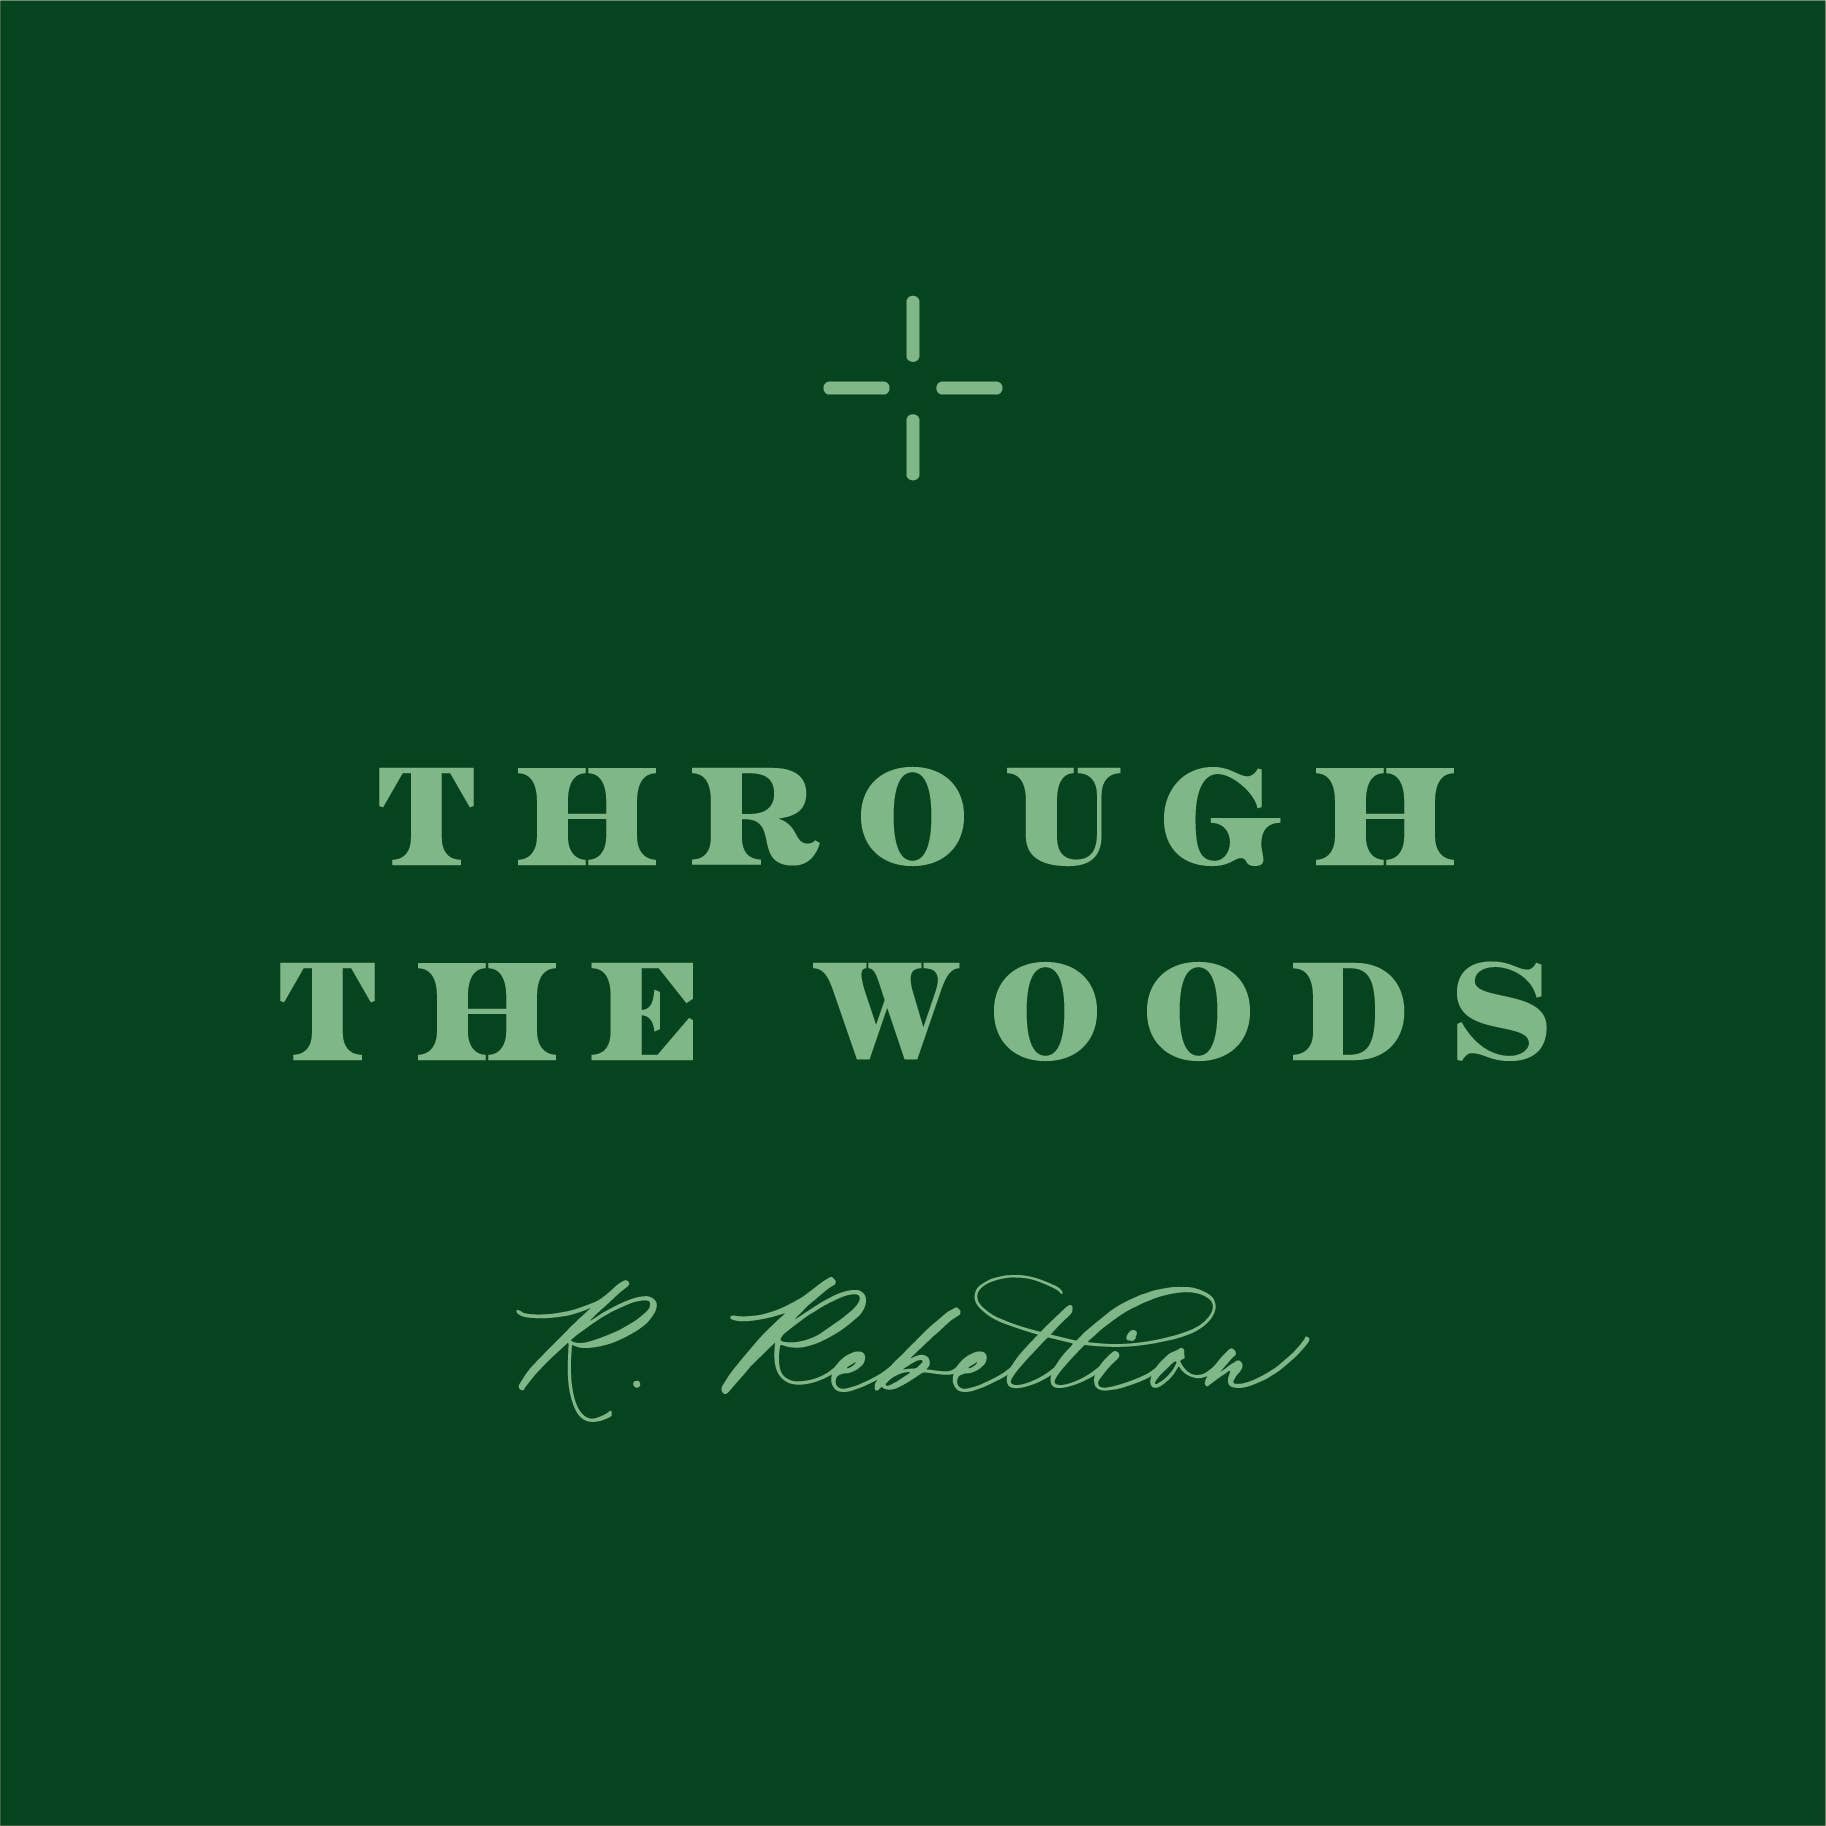 Through The Woods Candle 8 oz.